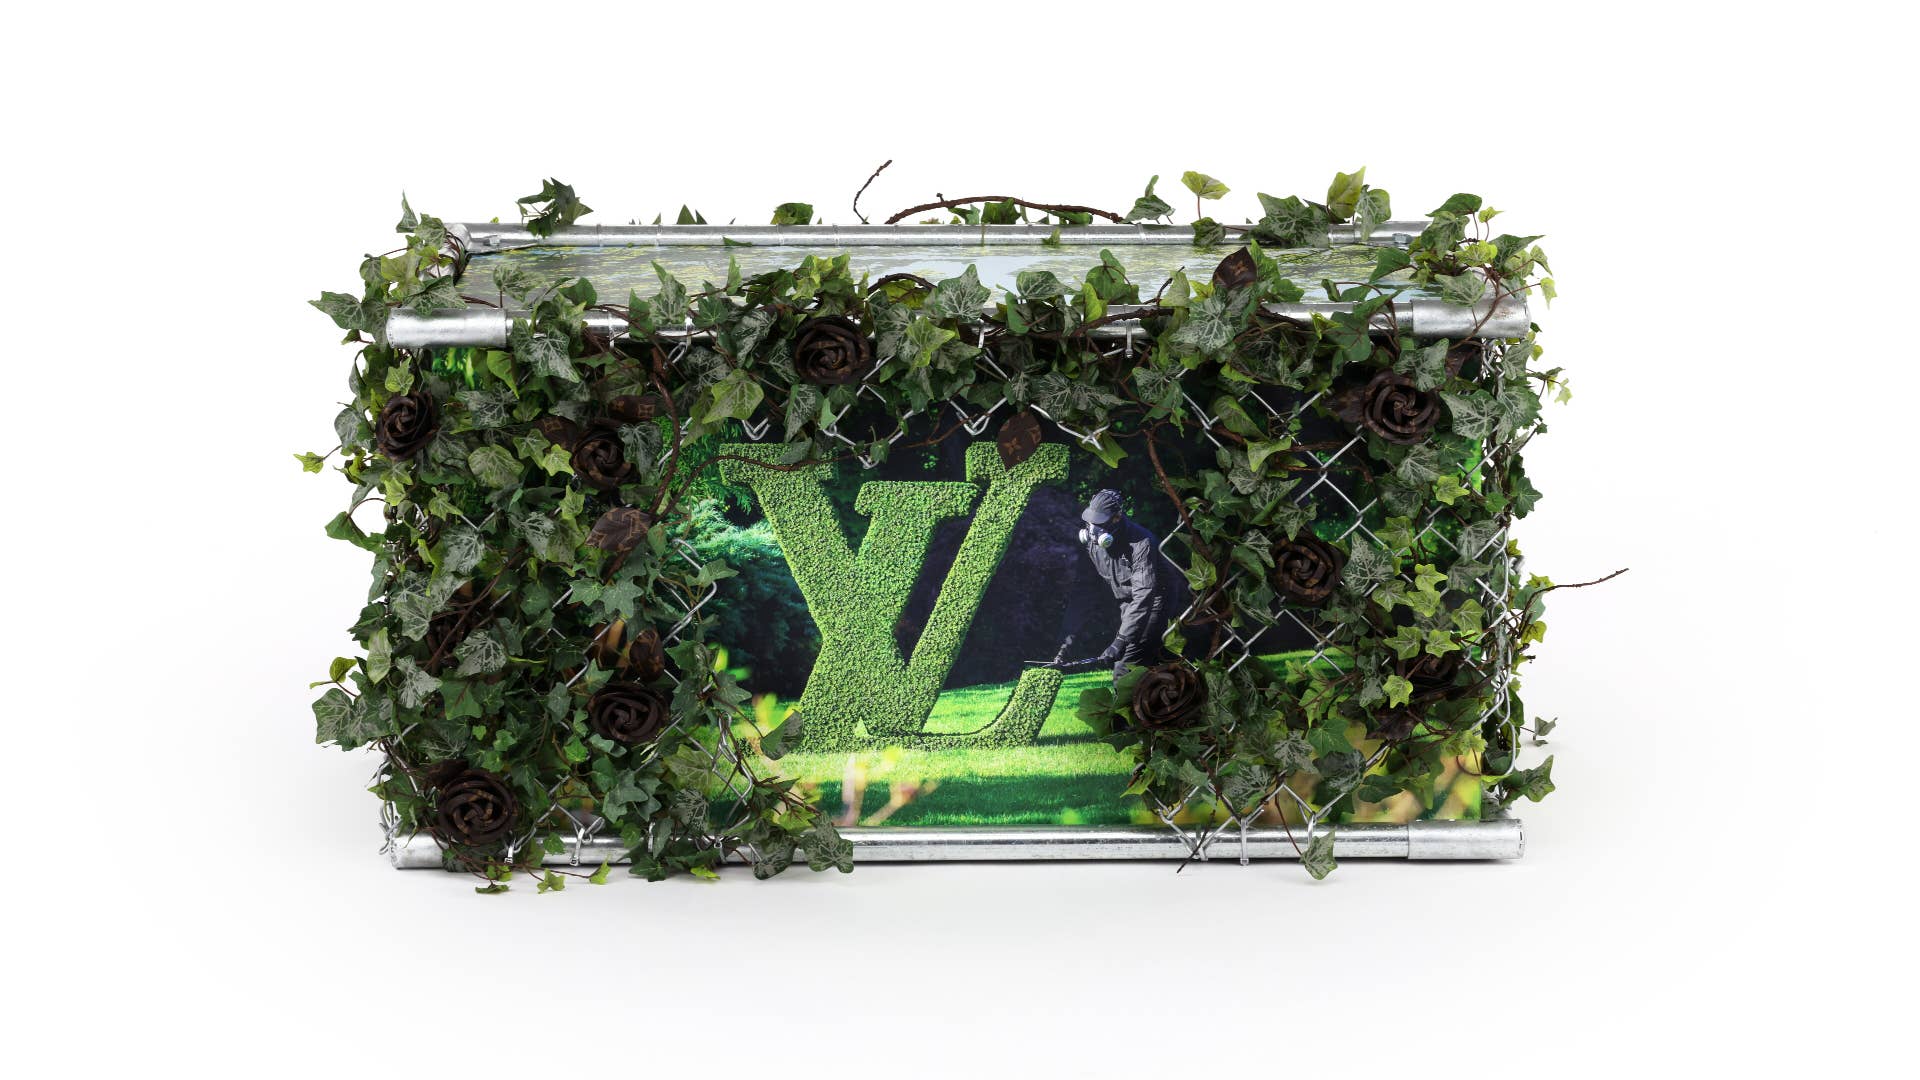 Louis Vuitton Commemorates Founder's 200th Birthday With Variety